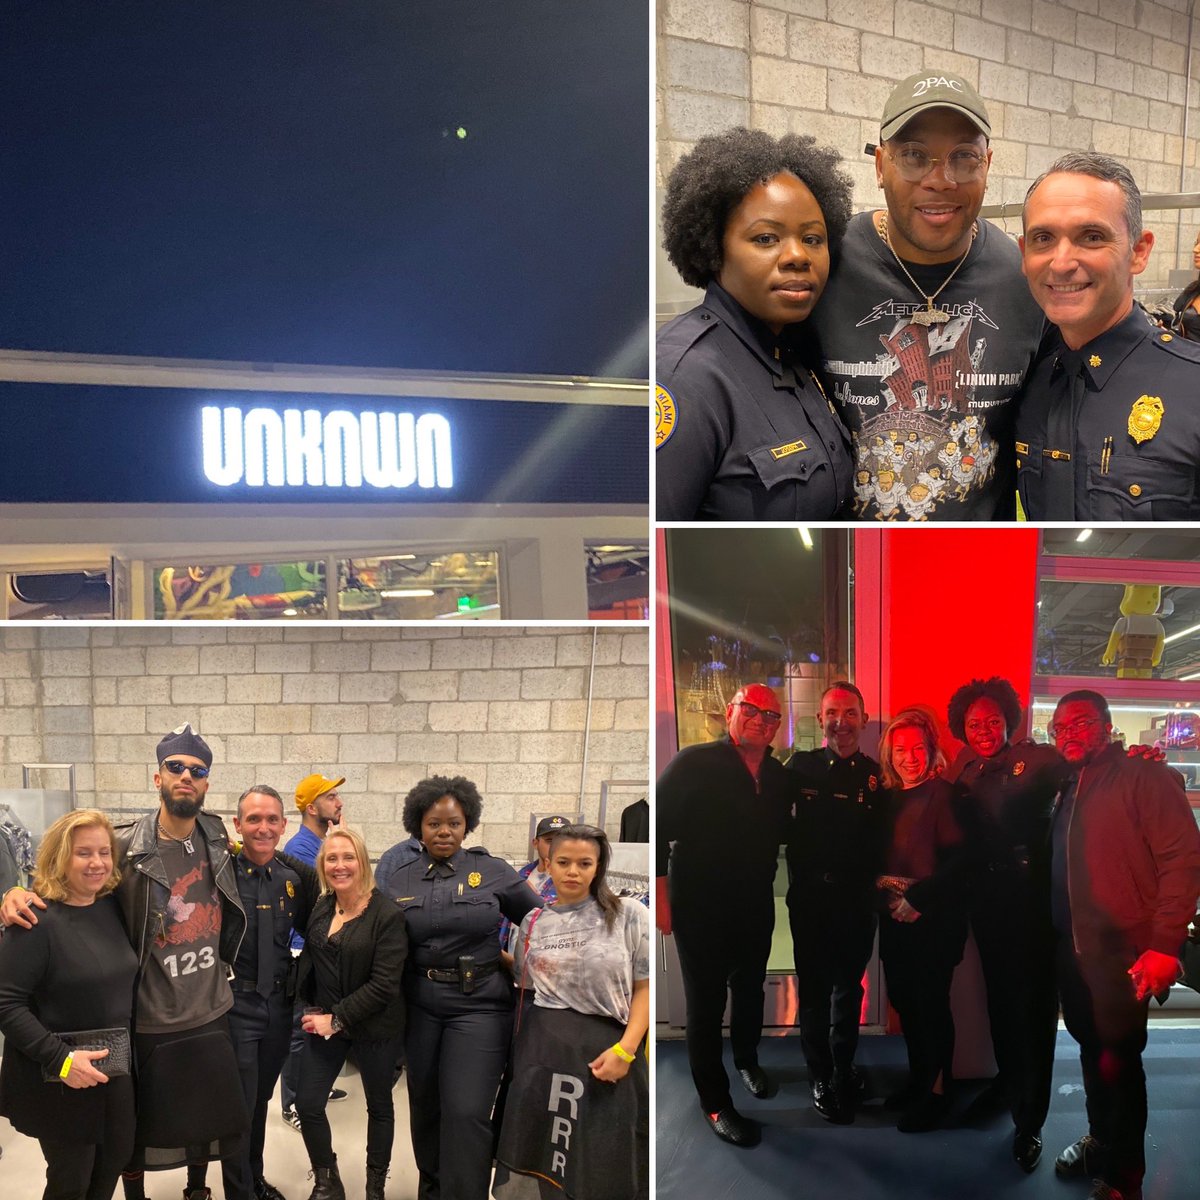 Last night “In the Wood” the opening of @UNKNWN! We ran into Mr. FloRida @official_flo and met eclectic curators!! I also brought out the old basketball 🏀 skills!! @AlbertGuerraMPD #BuildingPartnerships